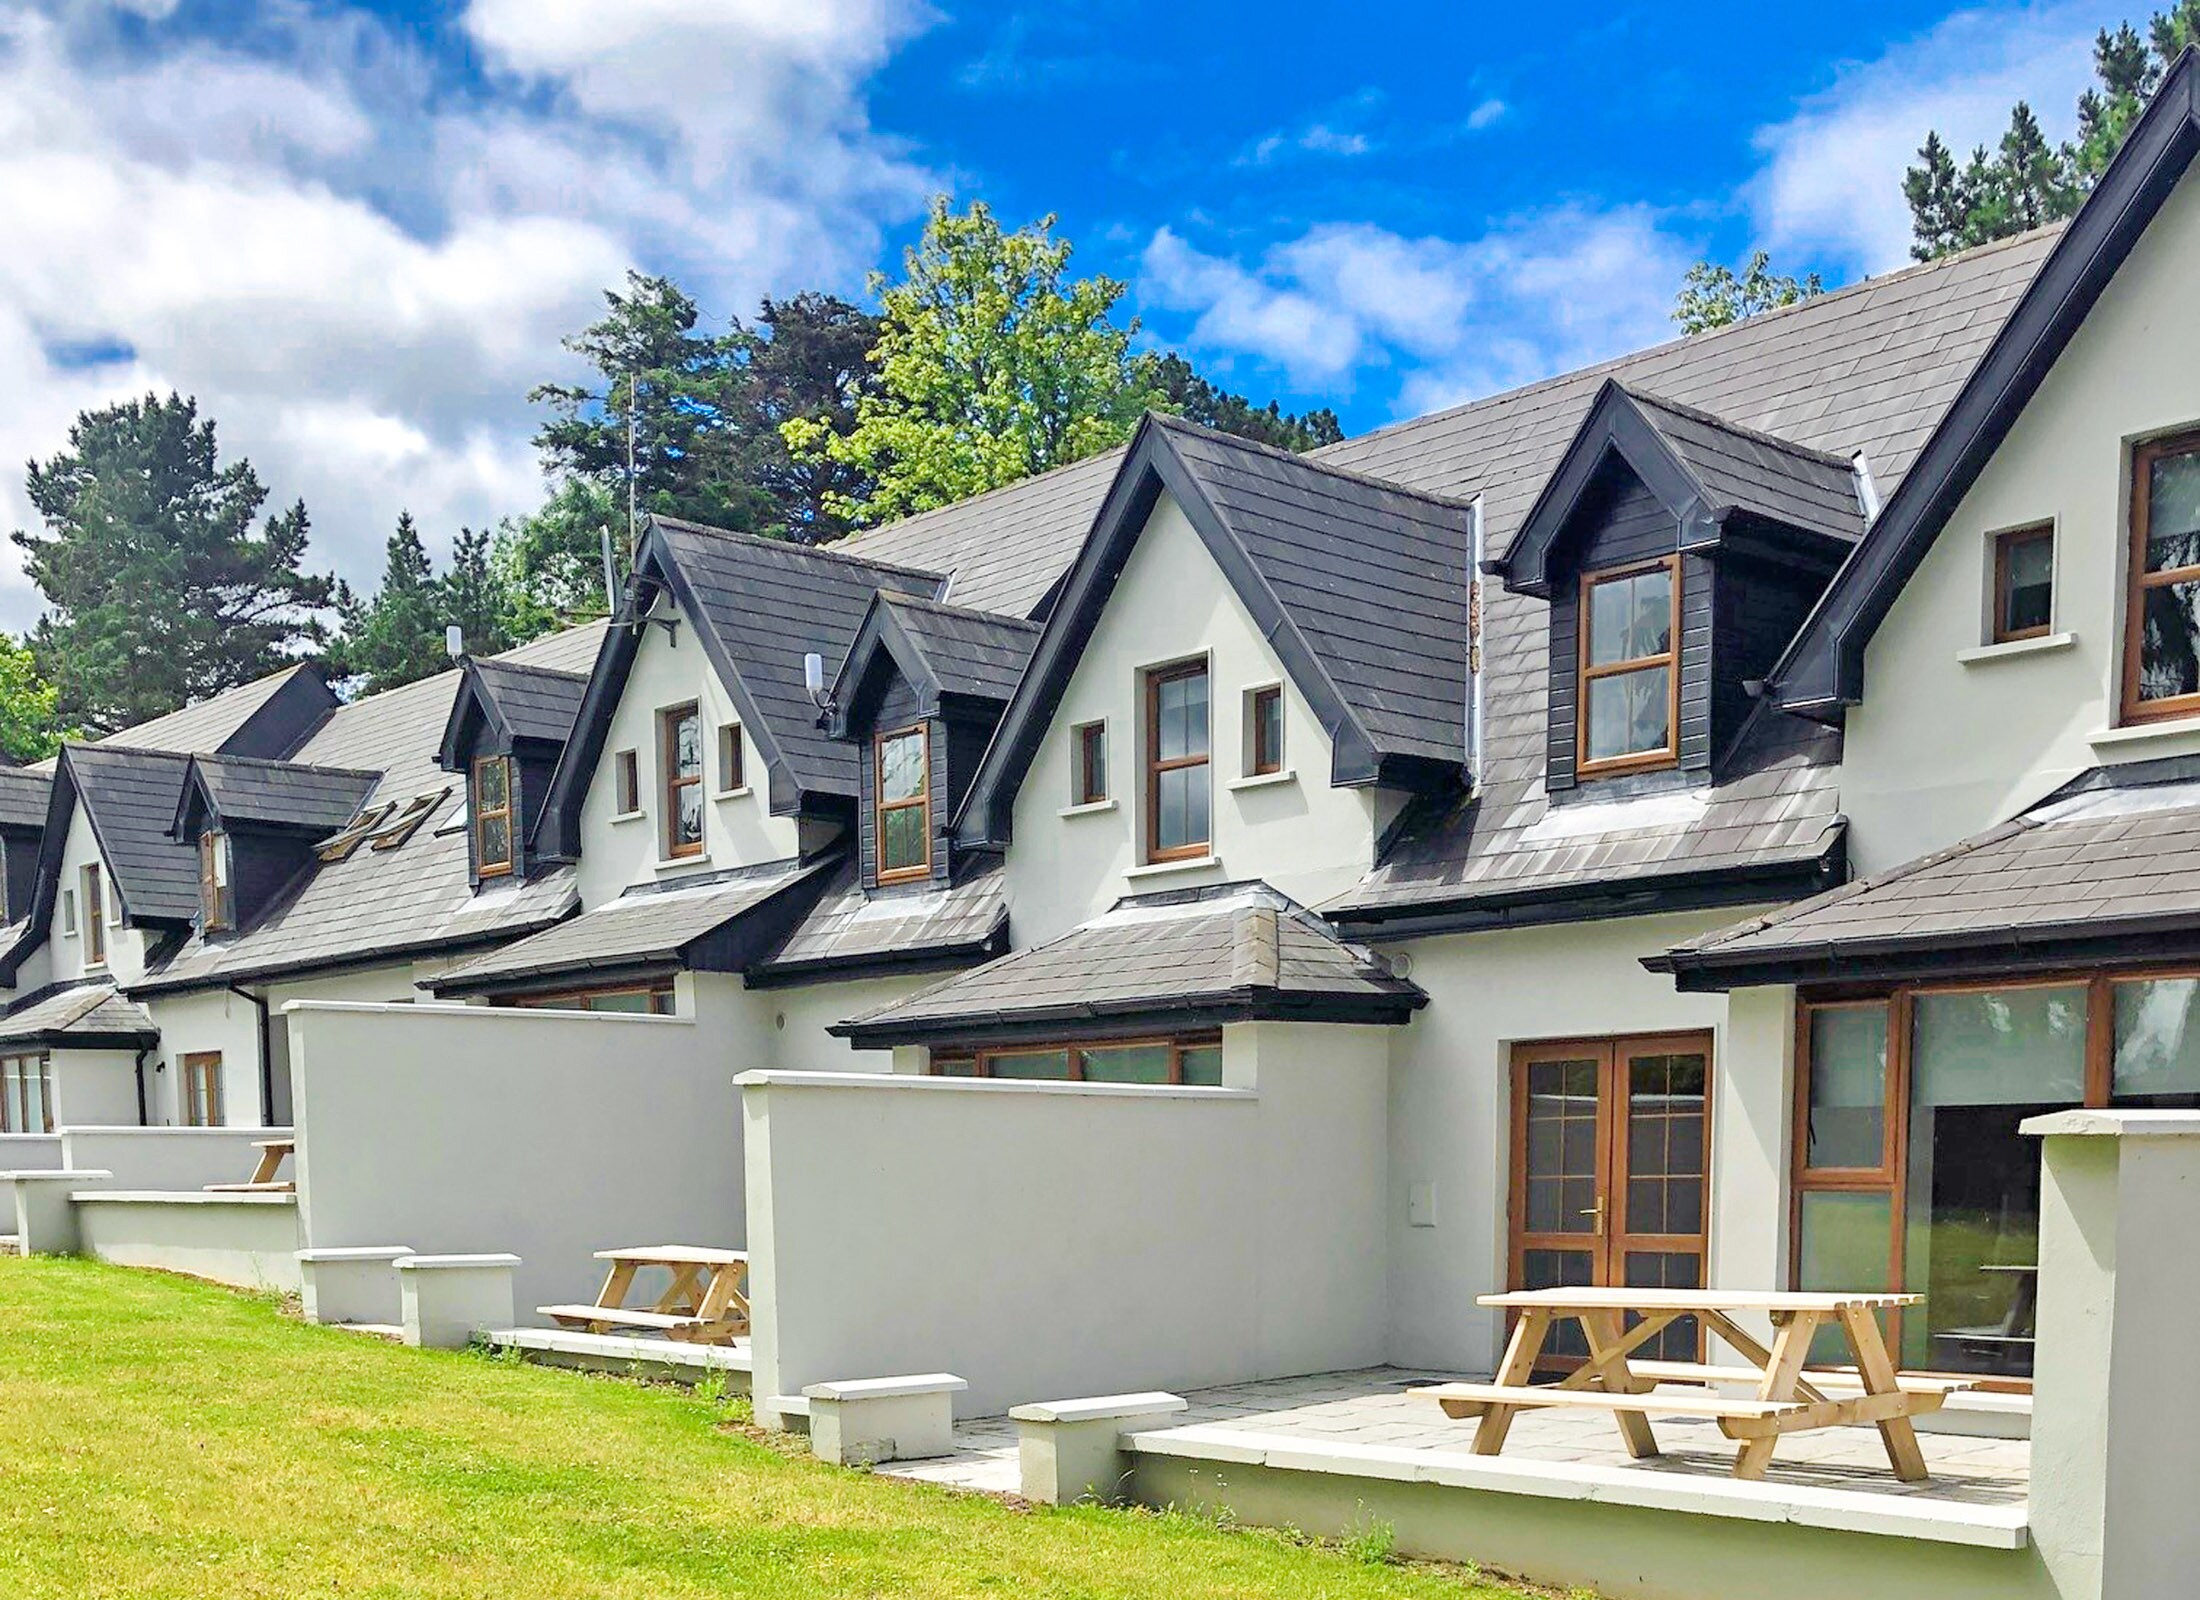 Old Court House Holiday Home, Pretty Lakeside Self Catering Holiday Accommodation Available Near Terryglass & Lough Derg in County Tipperary | Read More & Book Online Today